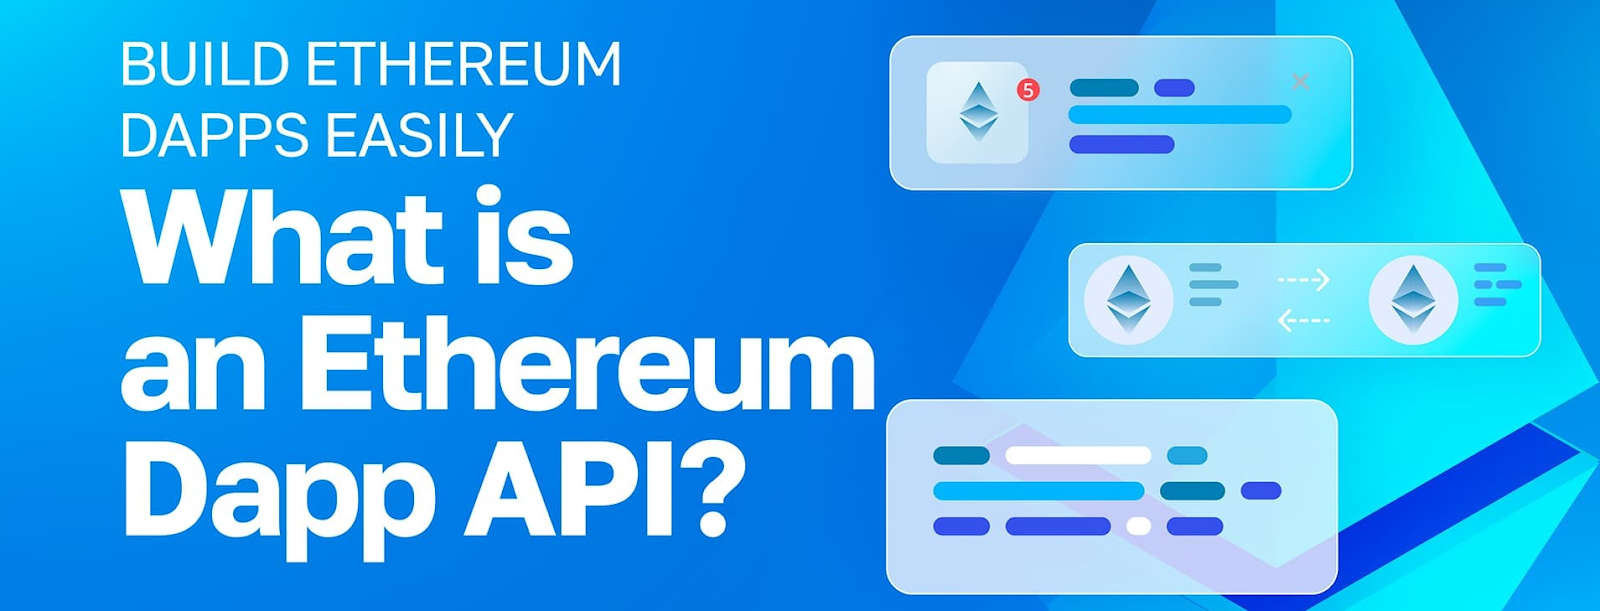 Title - What is an Ethereum Dapp API